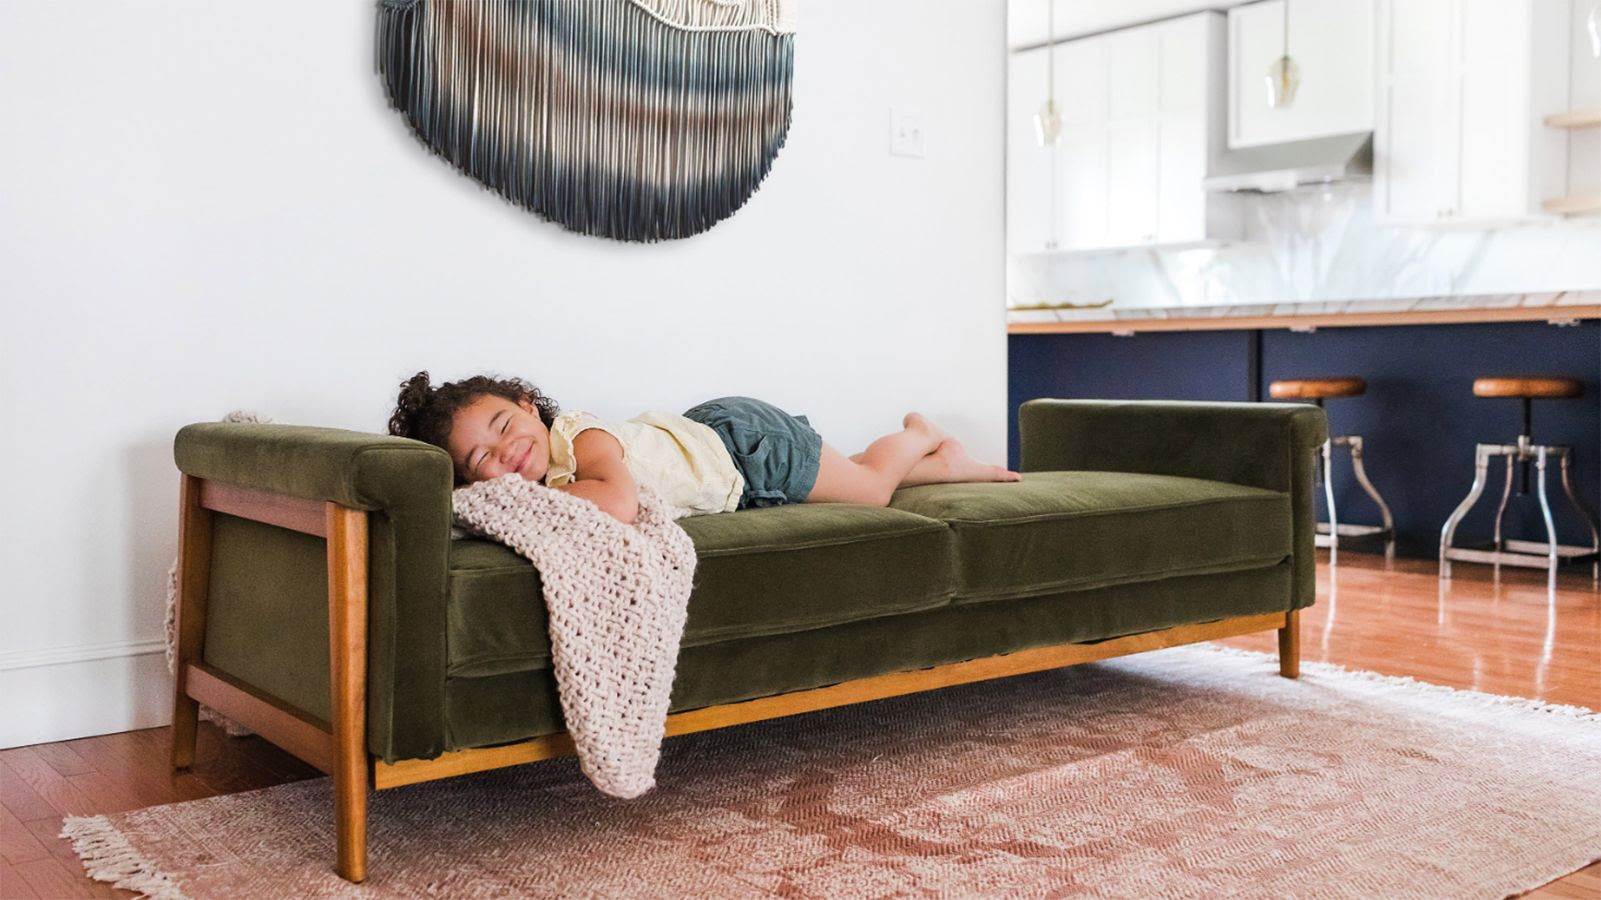 The best sleeper sofas, according to interior design experts